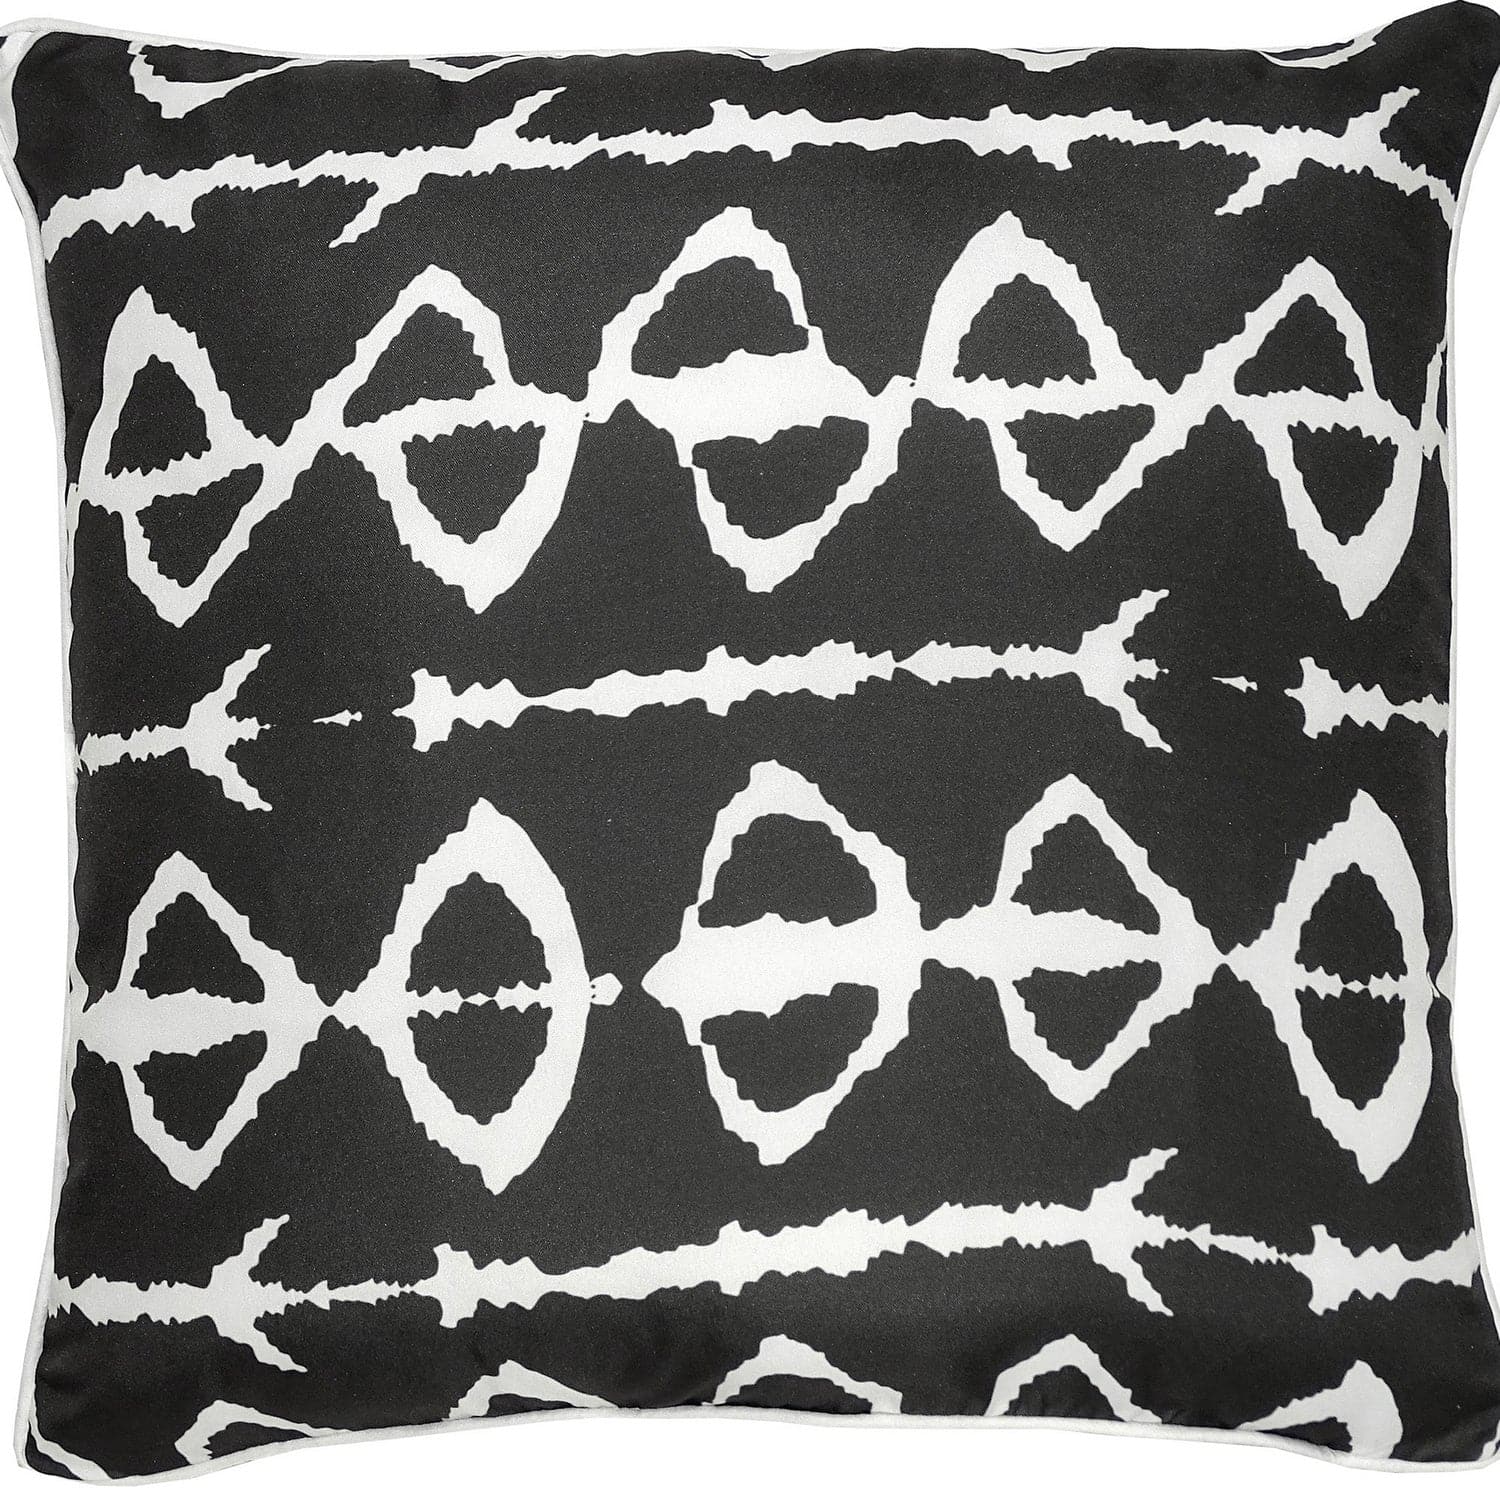 Renwil - PWFLO1007 - Home Accents - Rugs/Pillows/Blankets